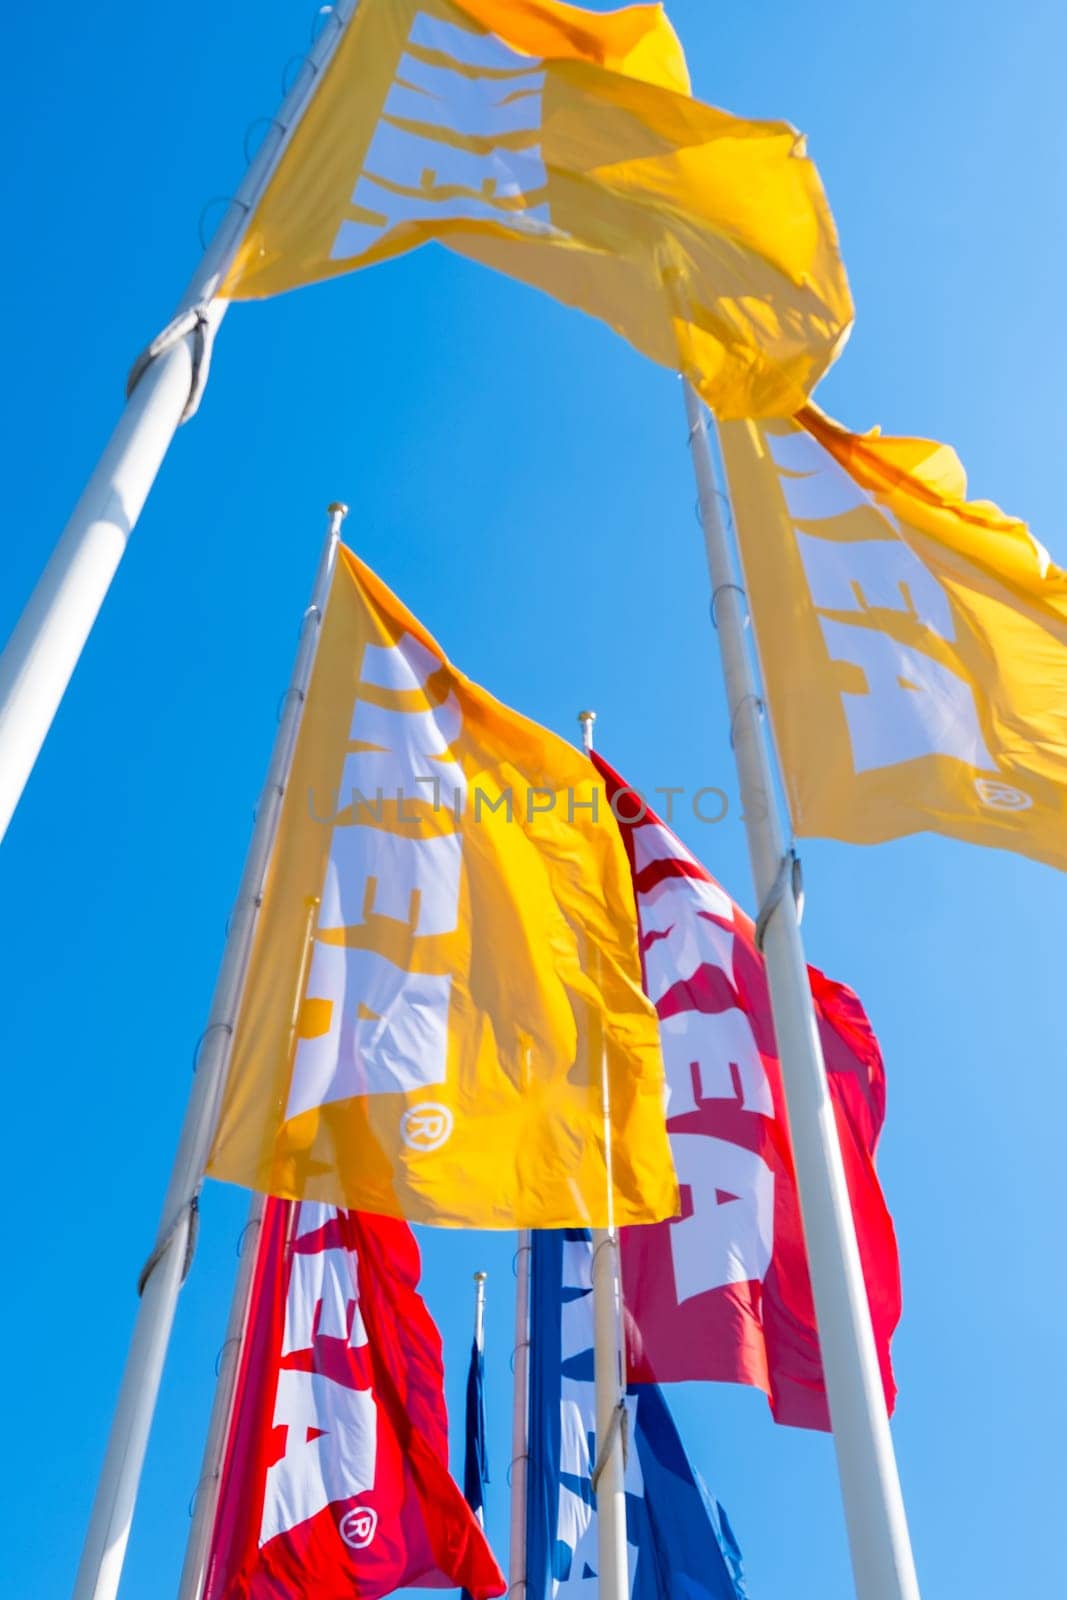 IKEA flags yellow, red and blue with sky on the background by vladimka